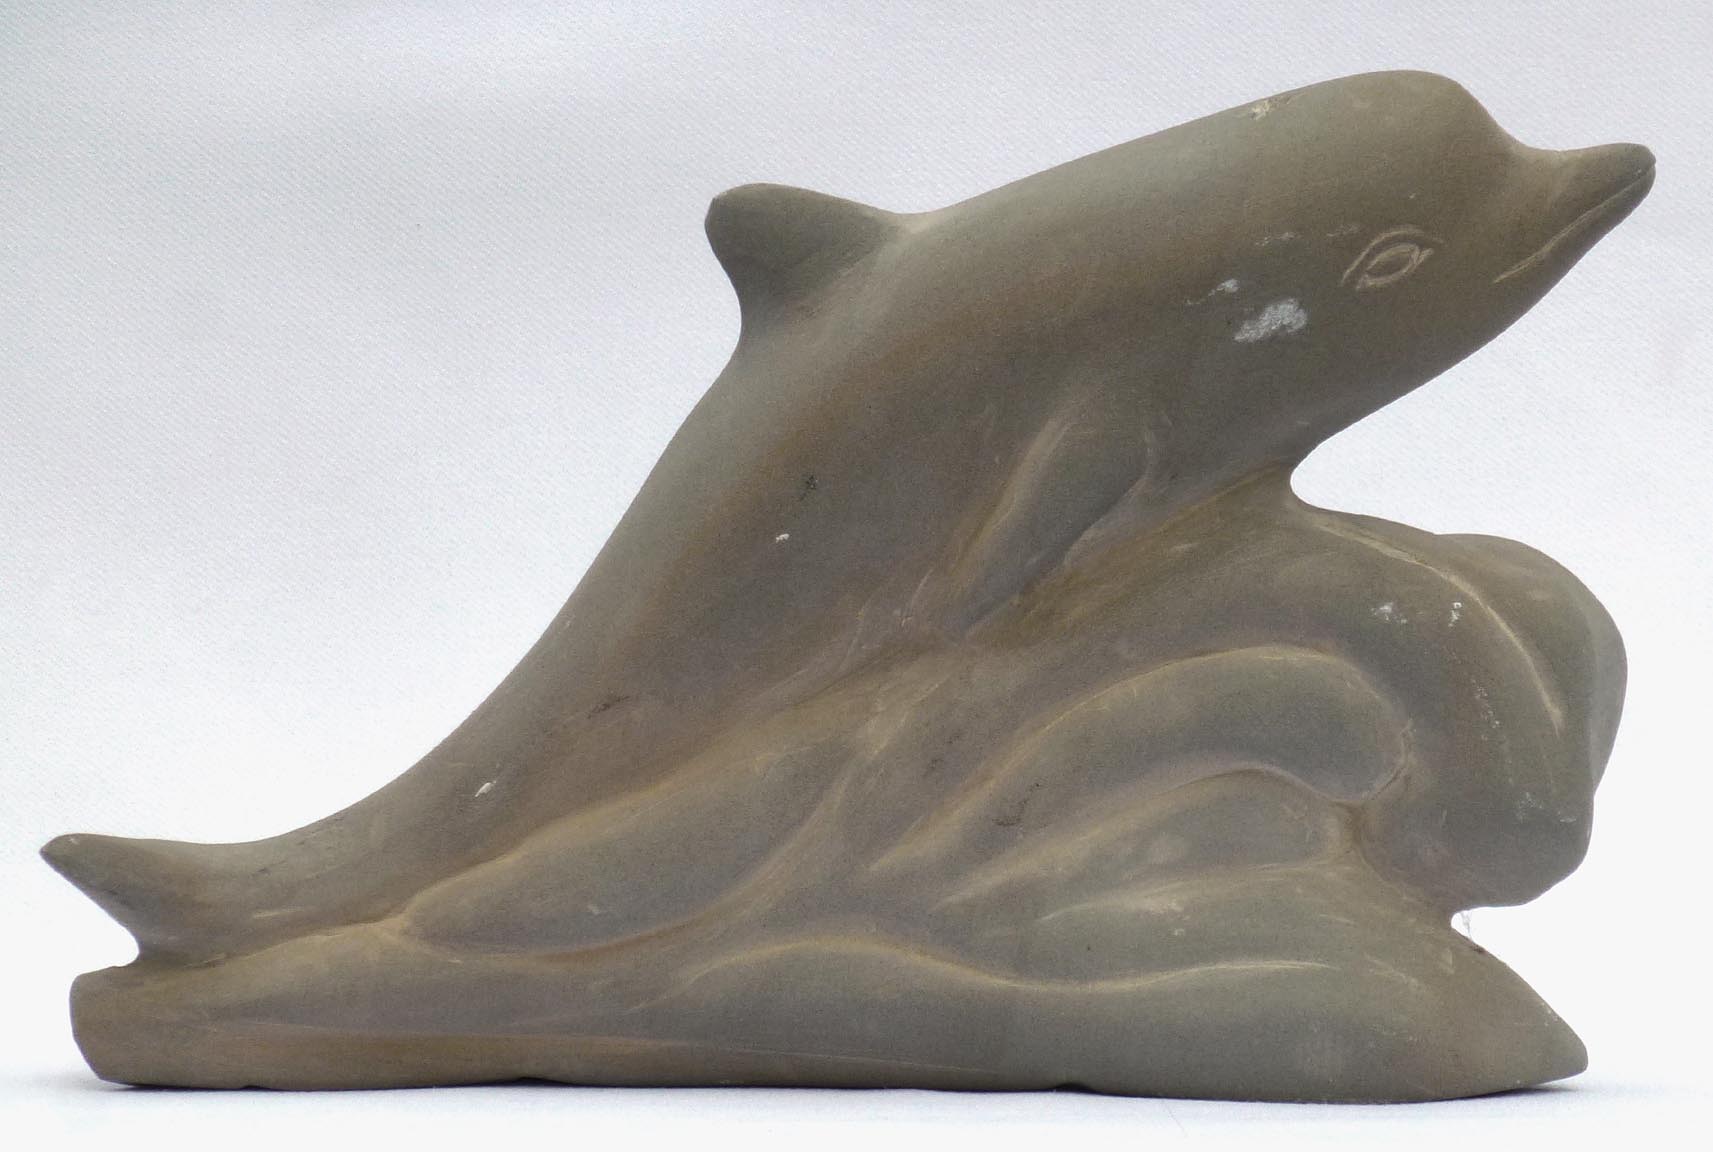 Carved stone dophin by Stanley Greer